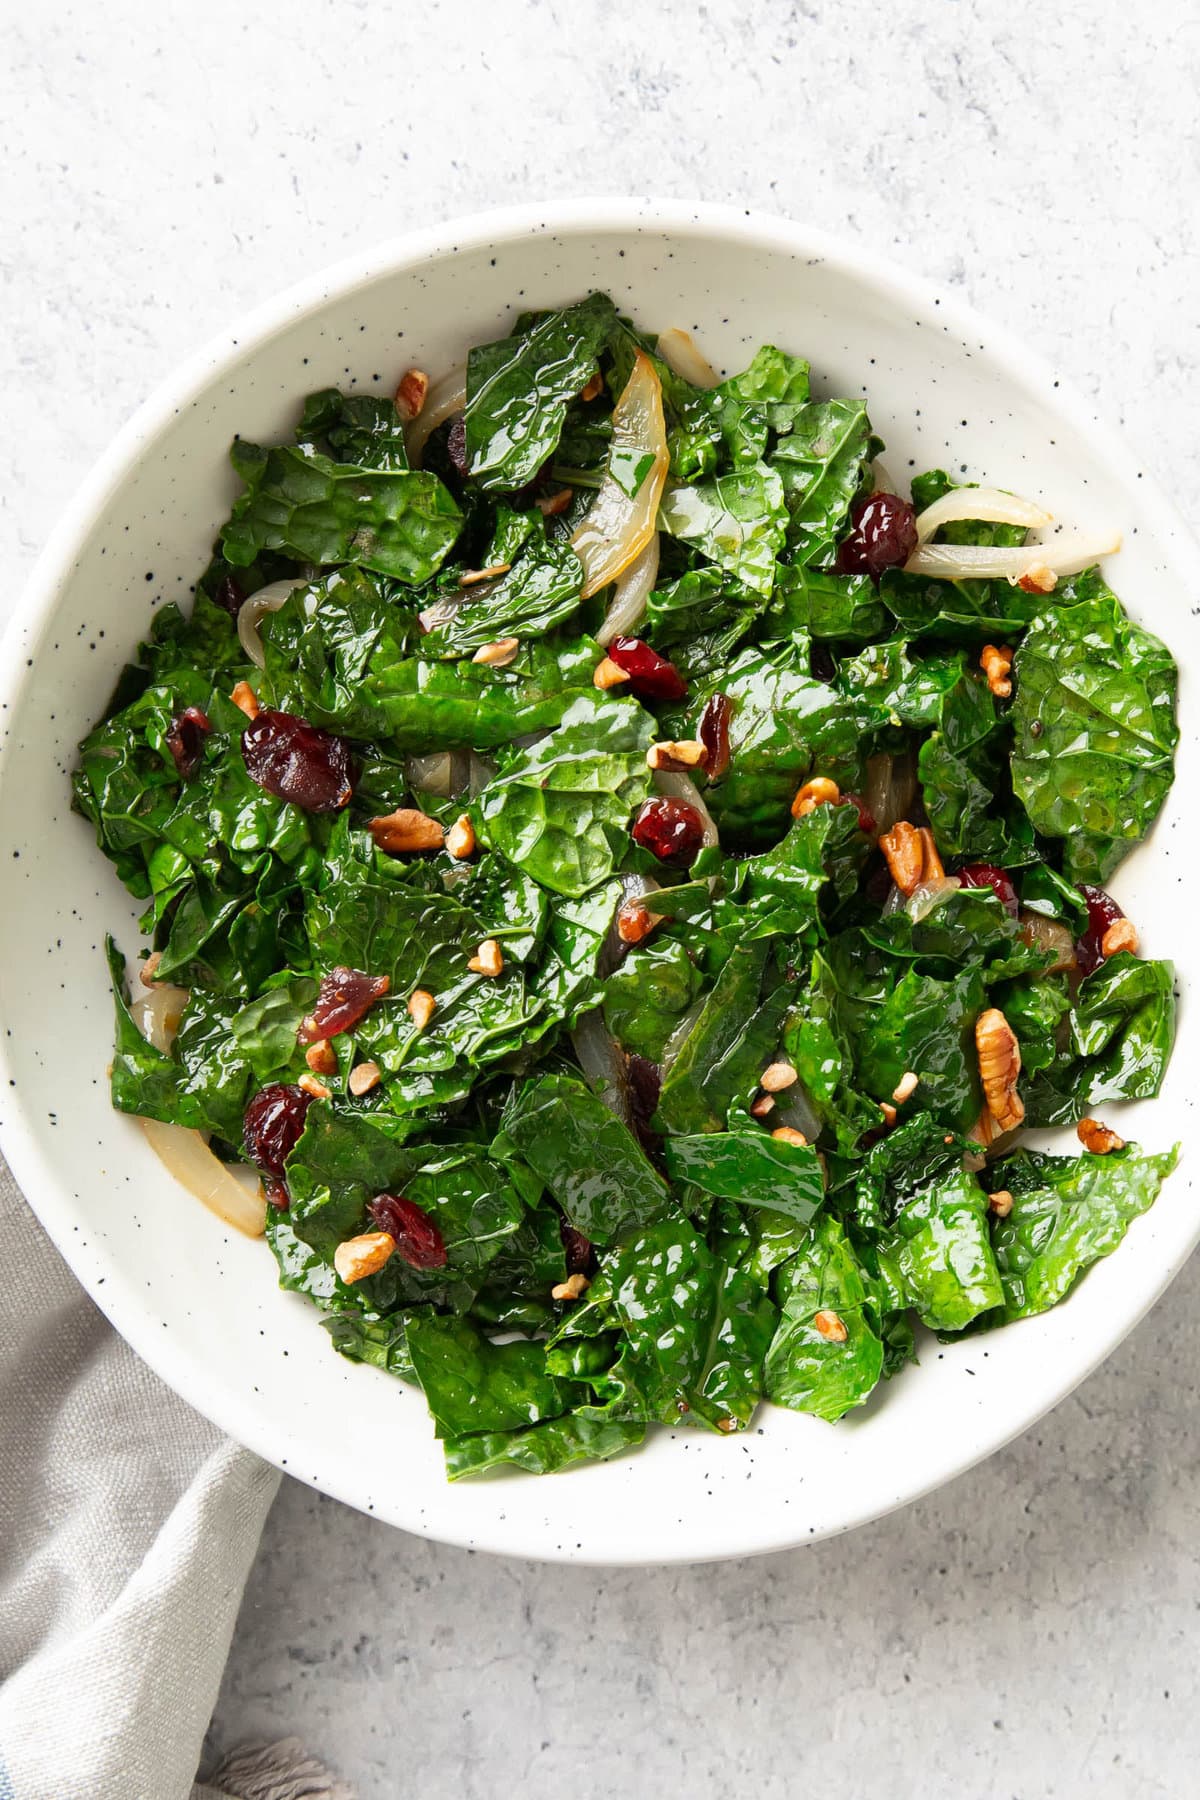 sautéed kale with cranberries and pecans served in a white bowl